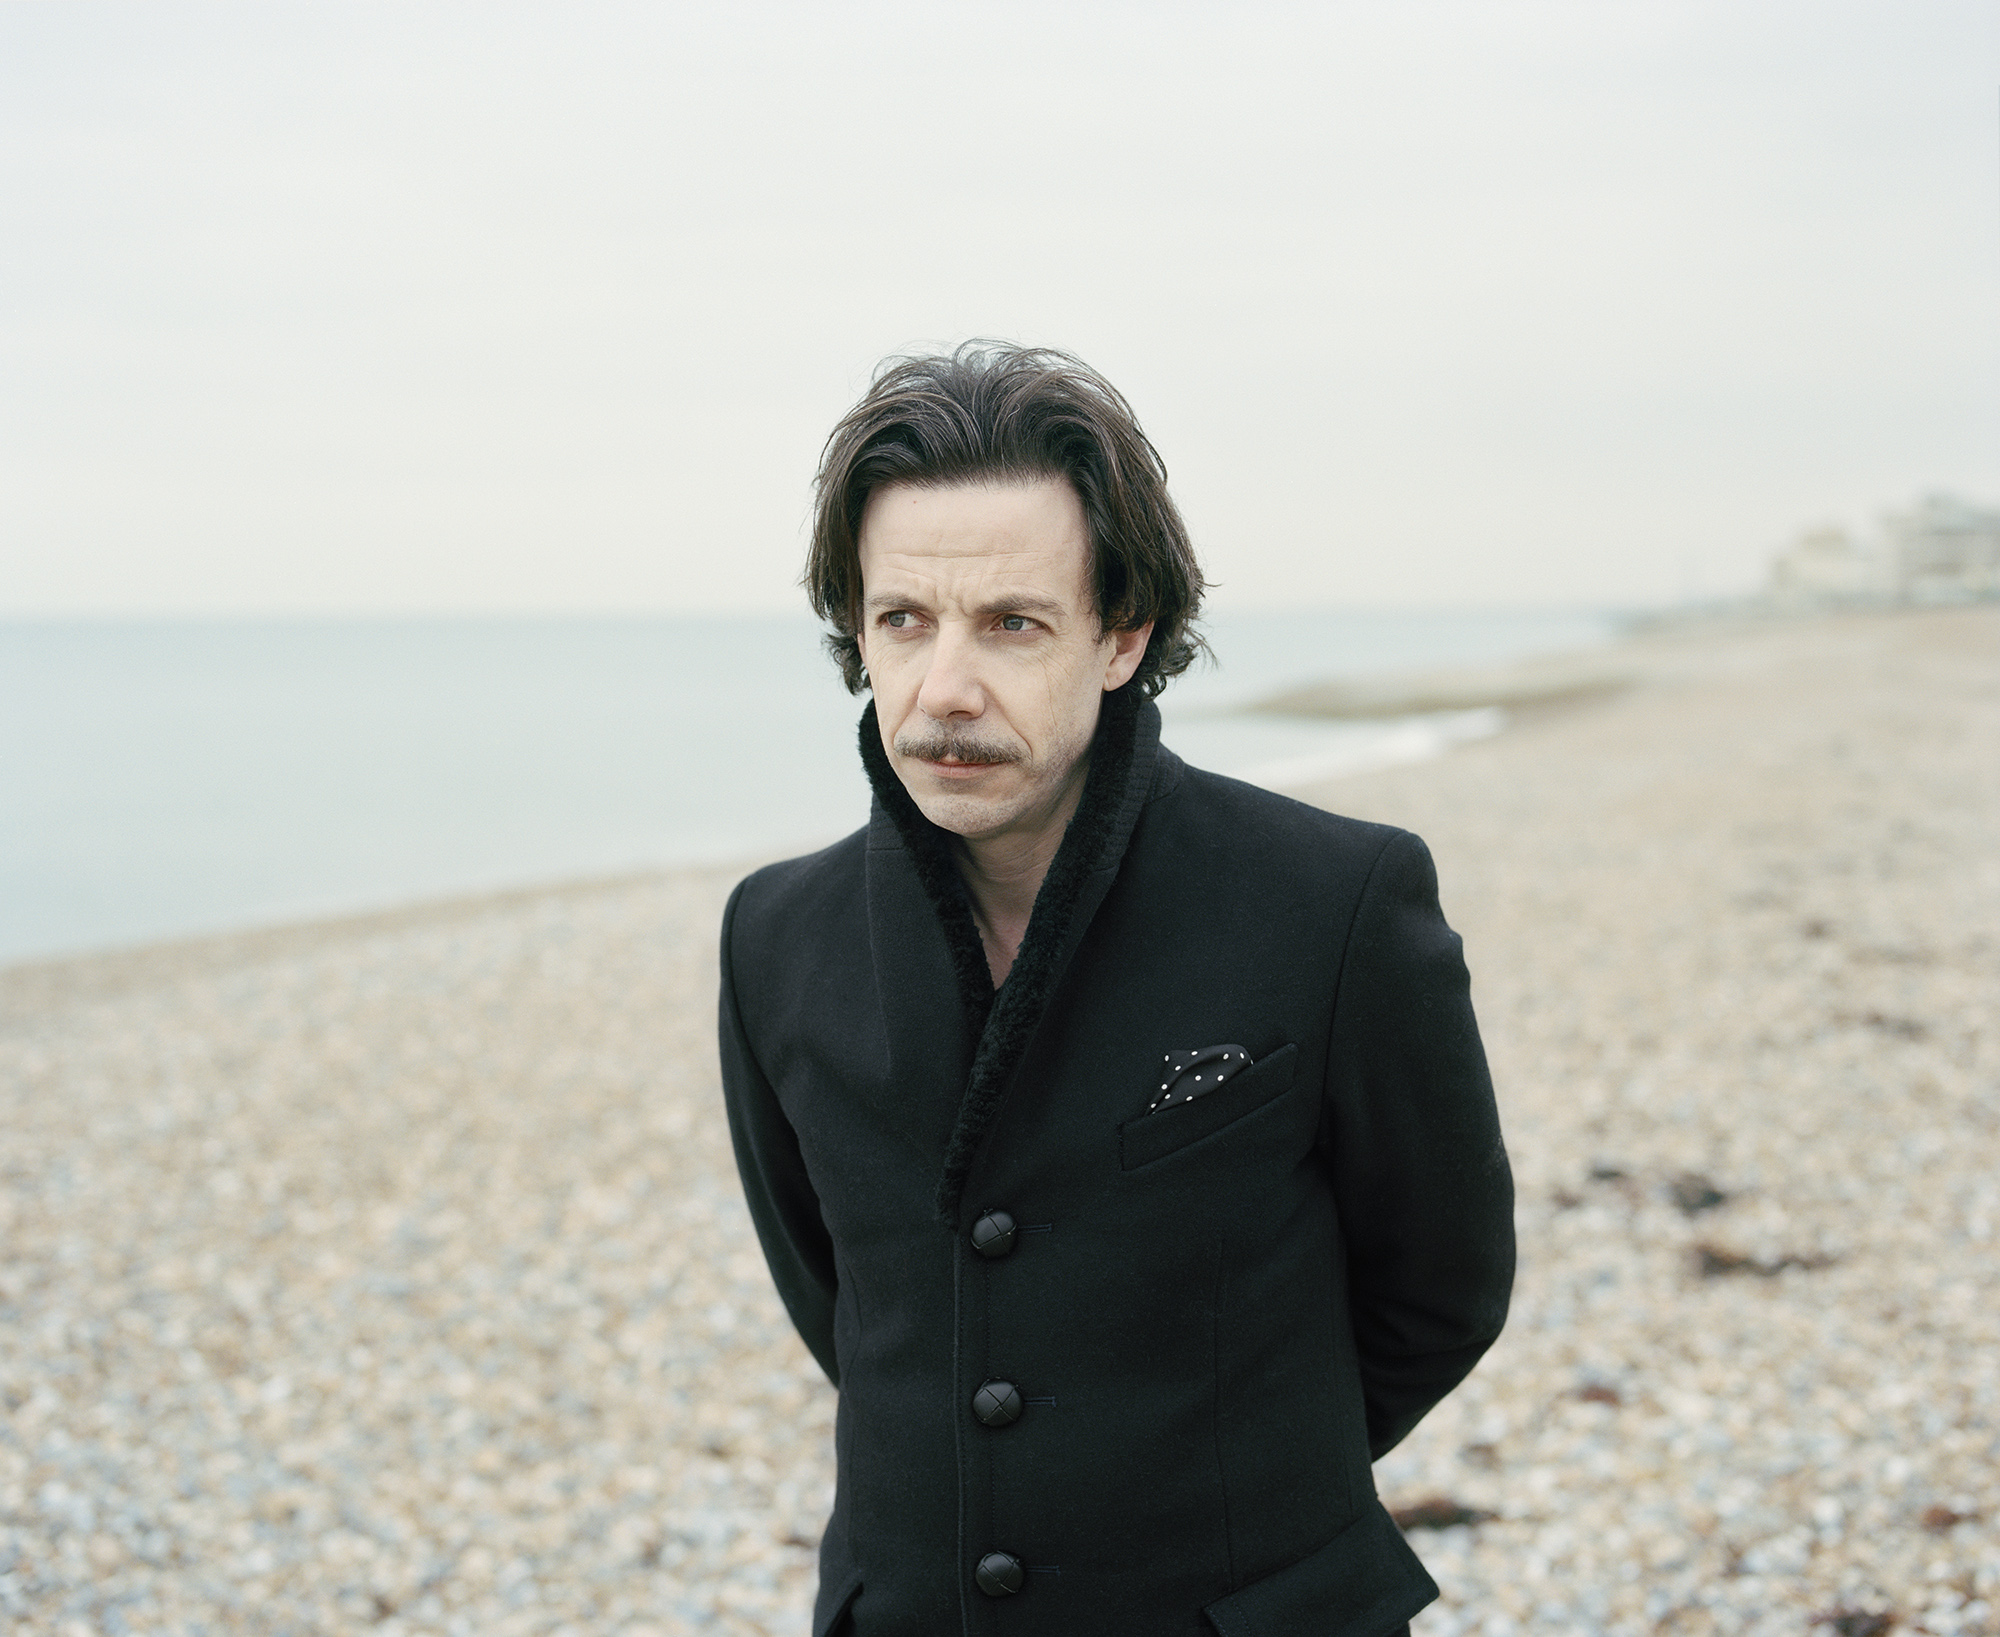 Noah Taylor interview, published in Oh Comely Issue Twenty. Photograph by Toby Coulson.